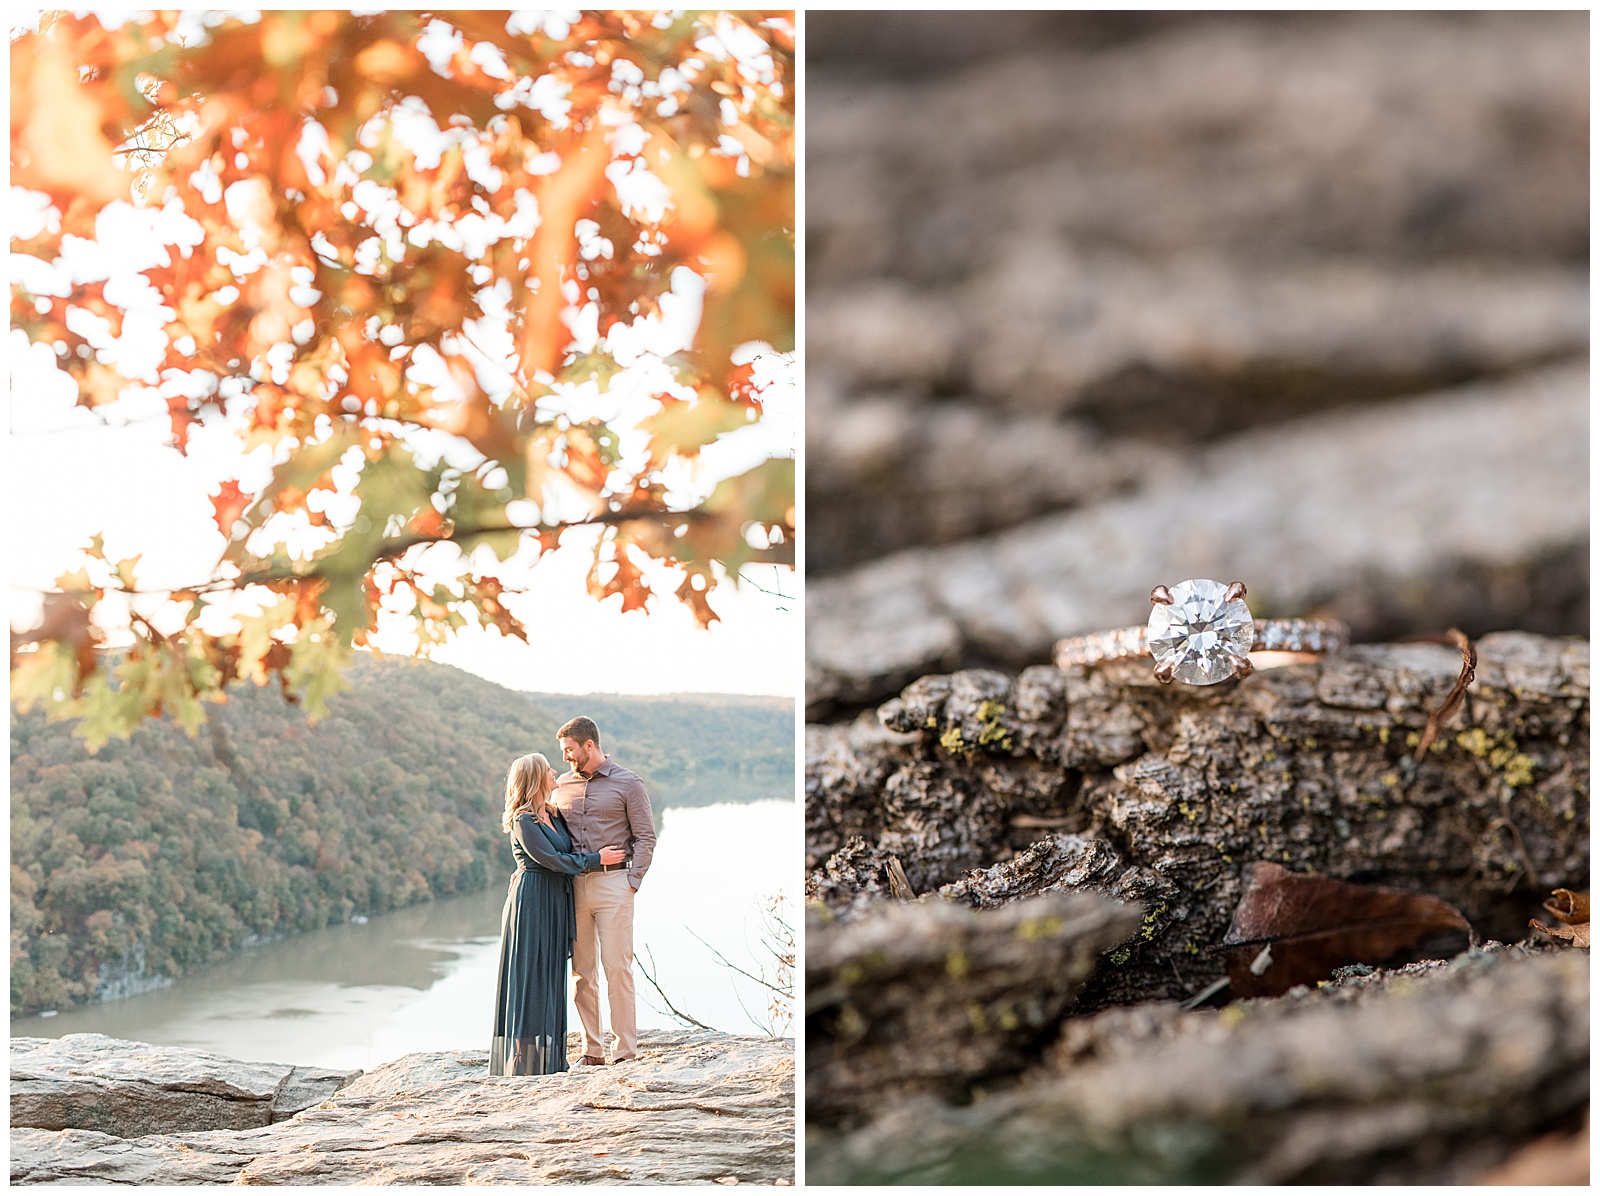 rose gold and diamond engagement ring resting on large rock on sunny fall day in pennsylvania